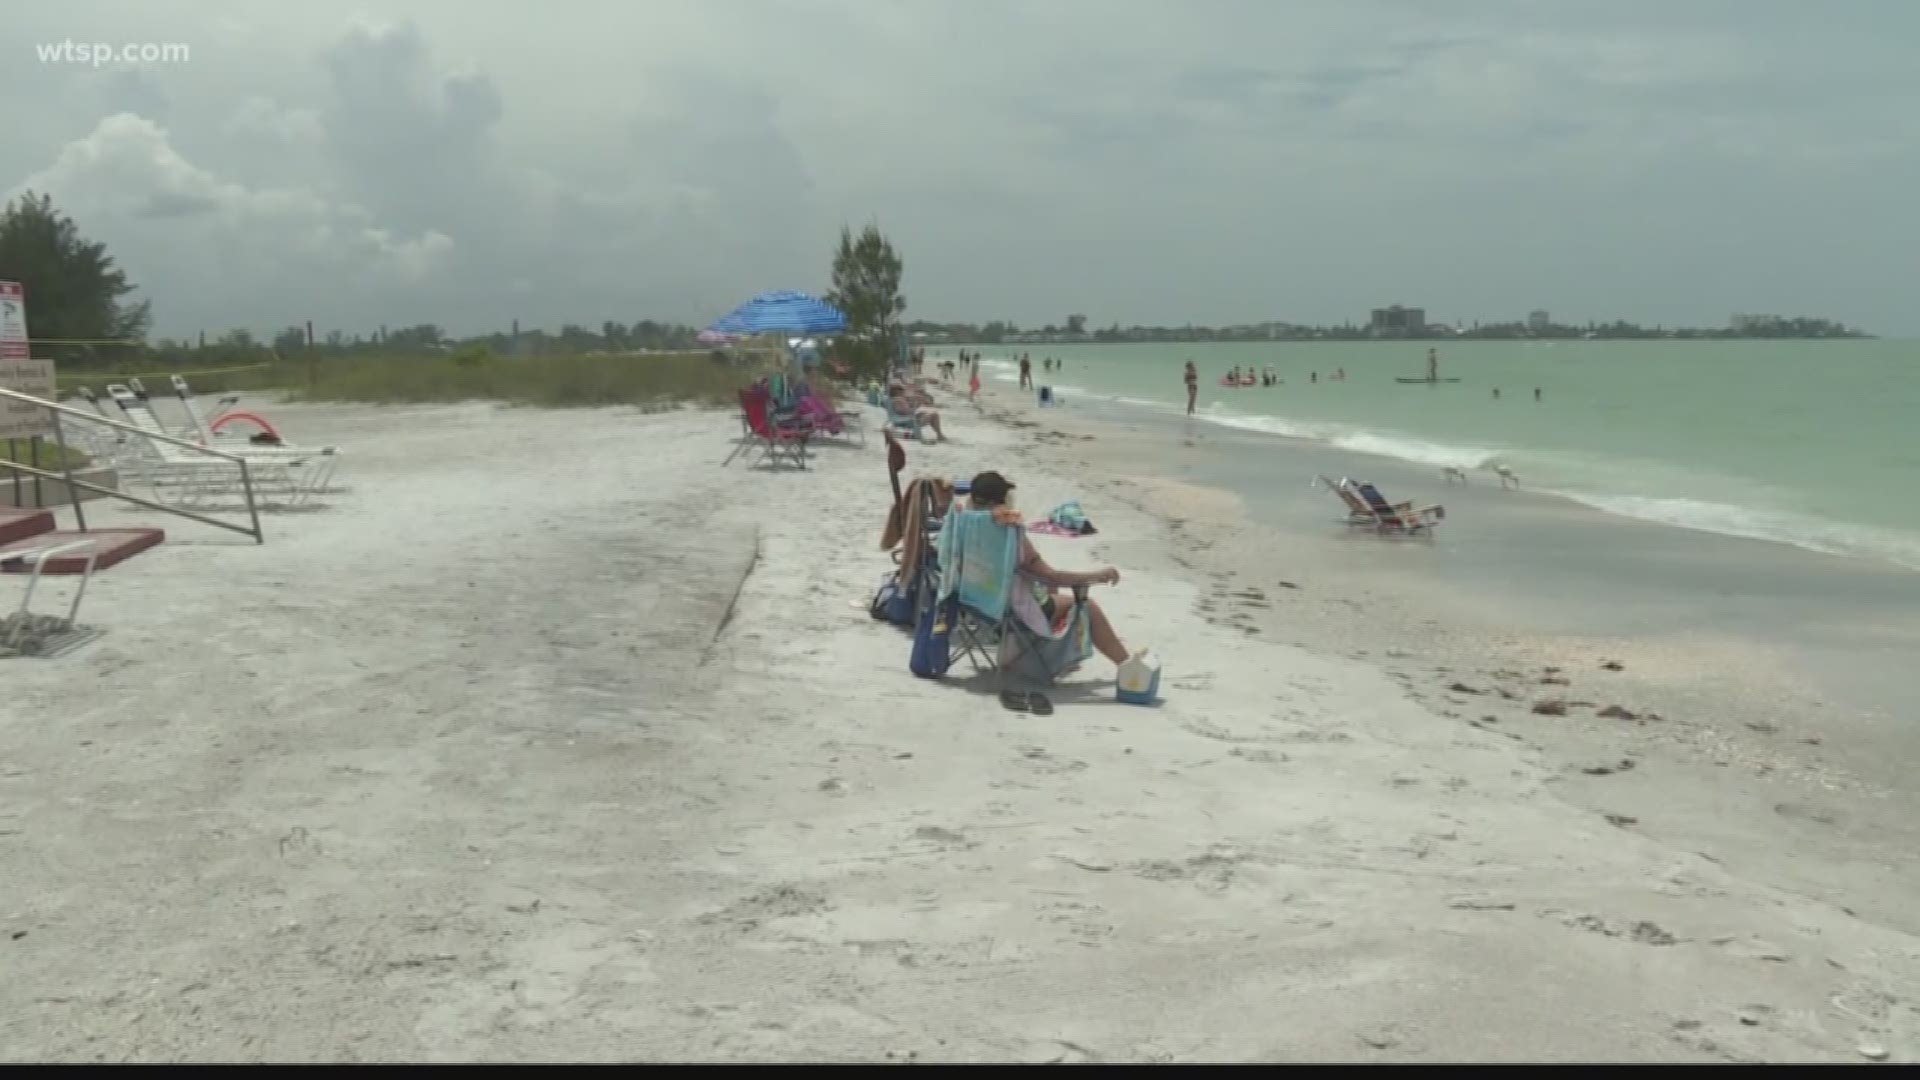 The director of parks and natural resources for Manatee County says this study doesn't apply to Florida beaches.